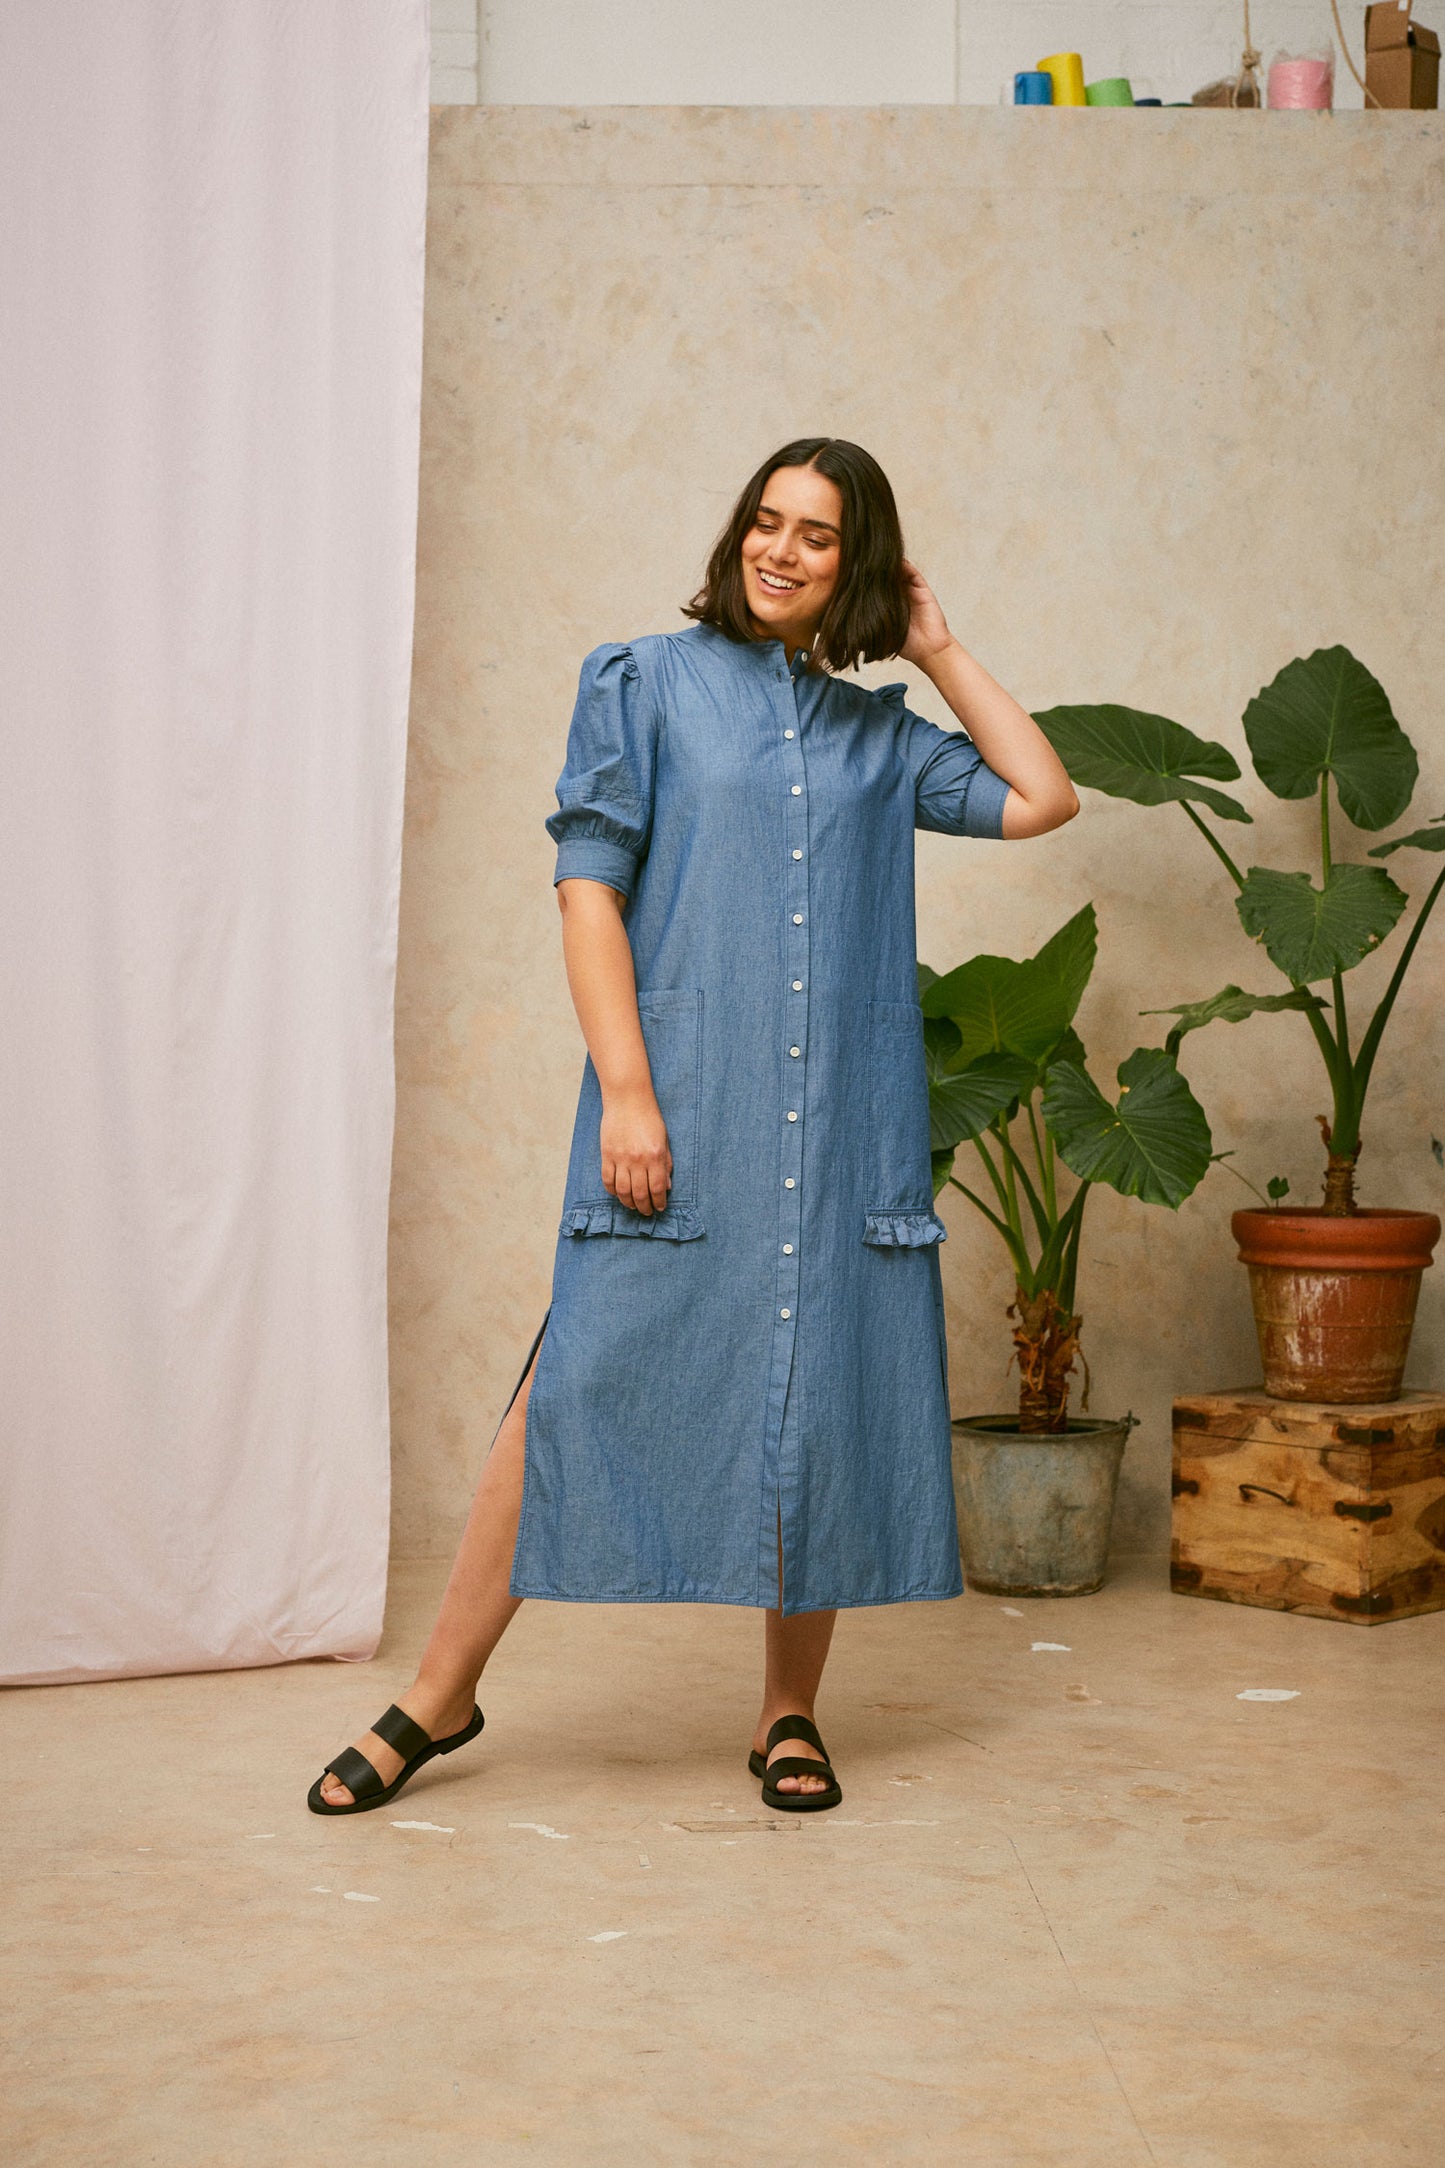 Full length shot of model wearing Saywood's Rosa denim shirtdress in light wash Japanese denim; a long line style with patch pockets and ruffles. Worn without belt and with black sandals. She smiles with her hand to the back of her head. A plant and drop of pink fabric can be seen in the background.